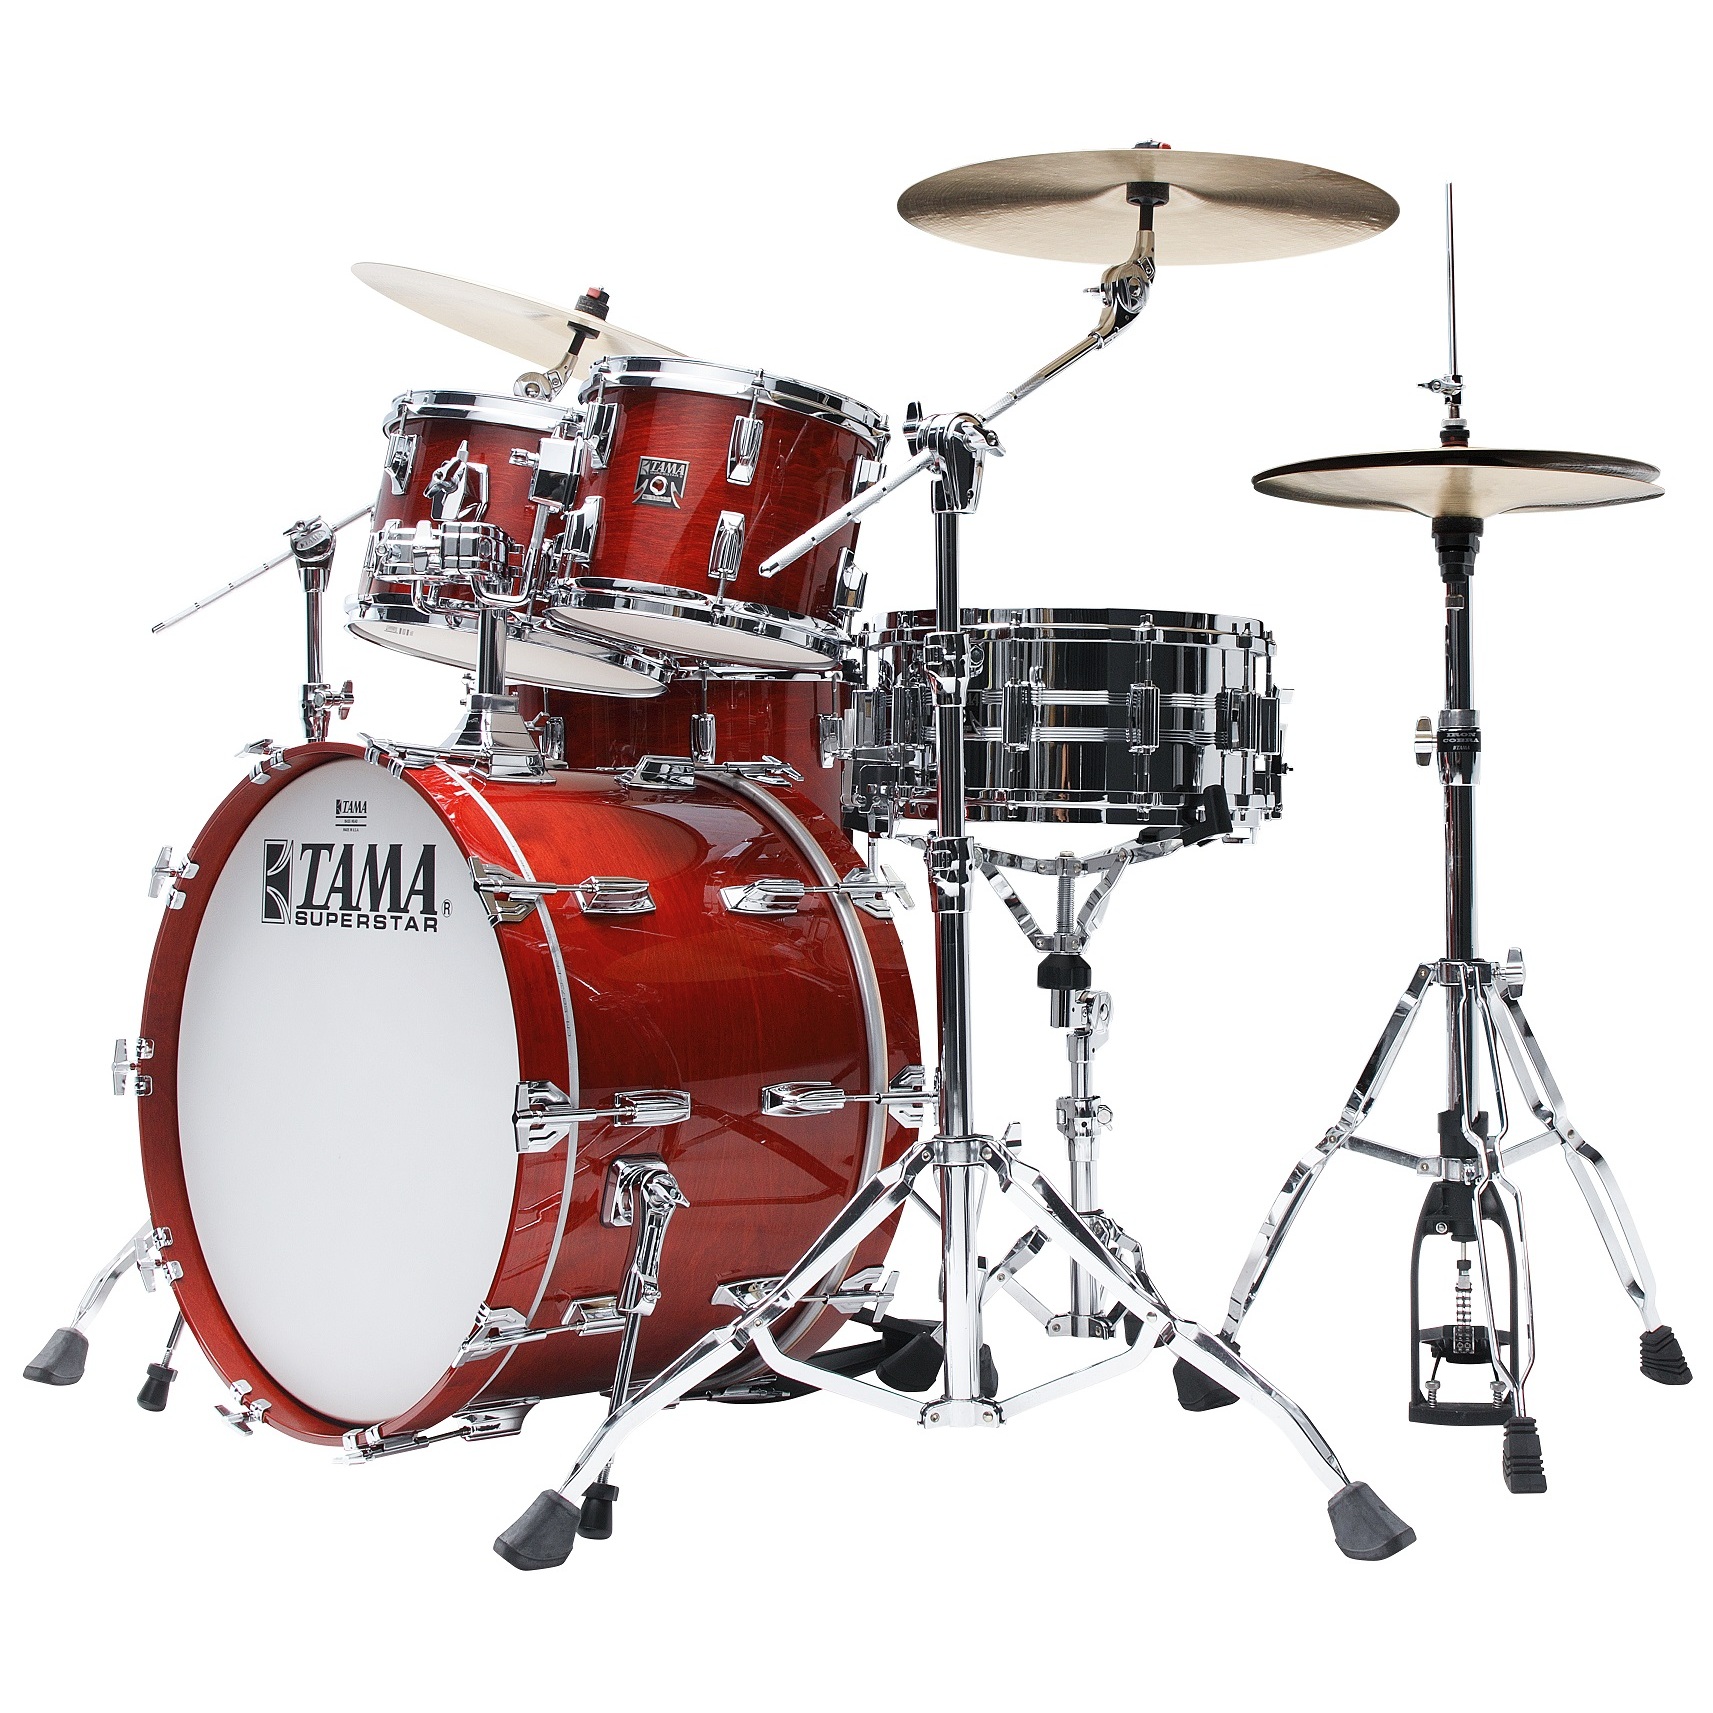 Tama SU42RS-CHW - 50th LIMITED Superstar Reissue 4pcs Drum Shell Kit - Cherry Wine 6